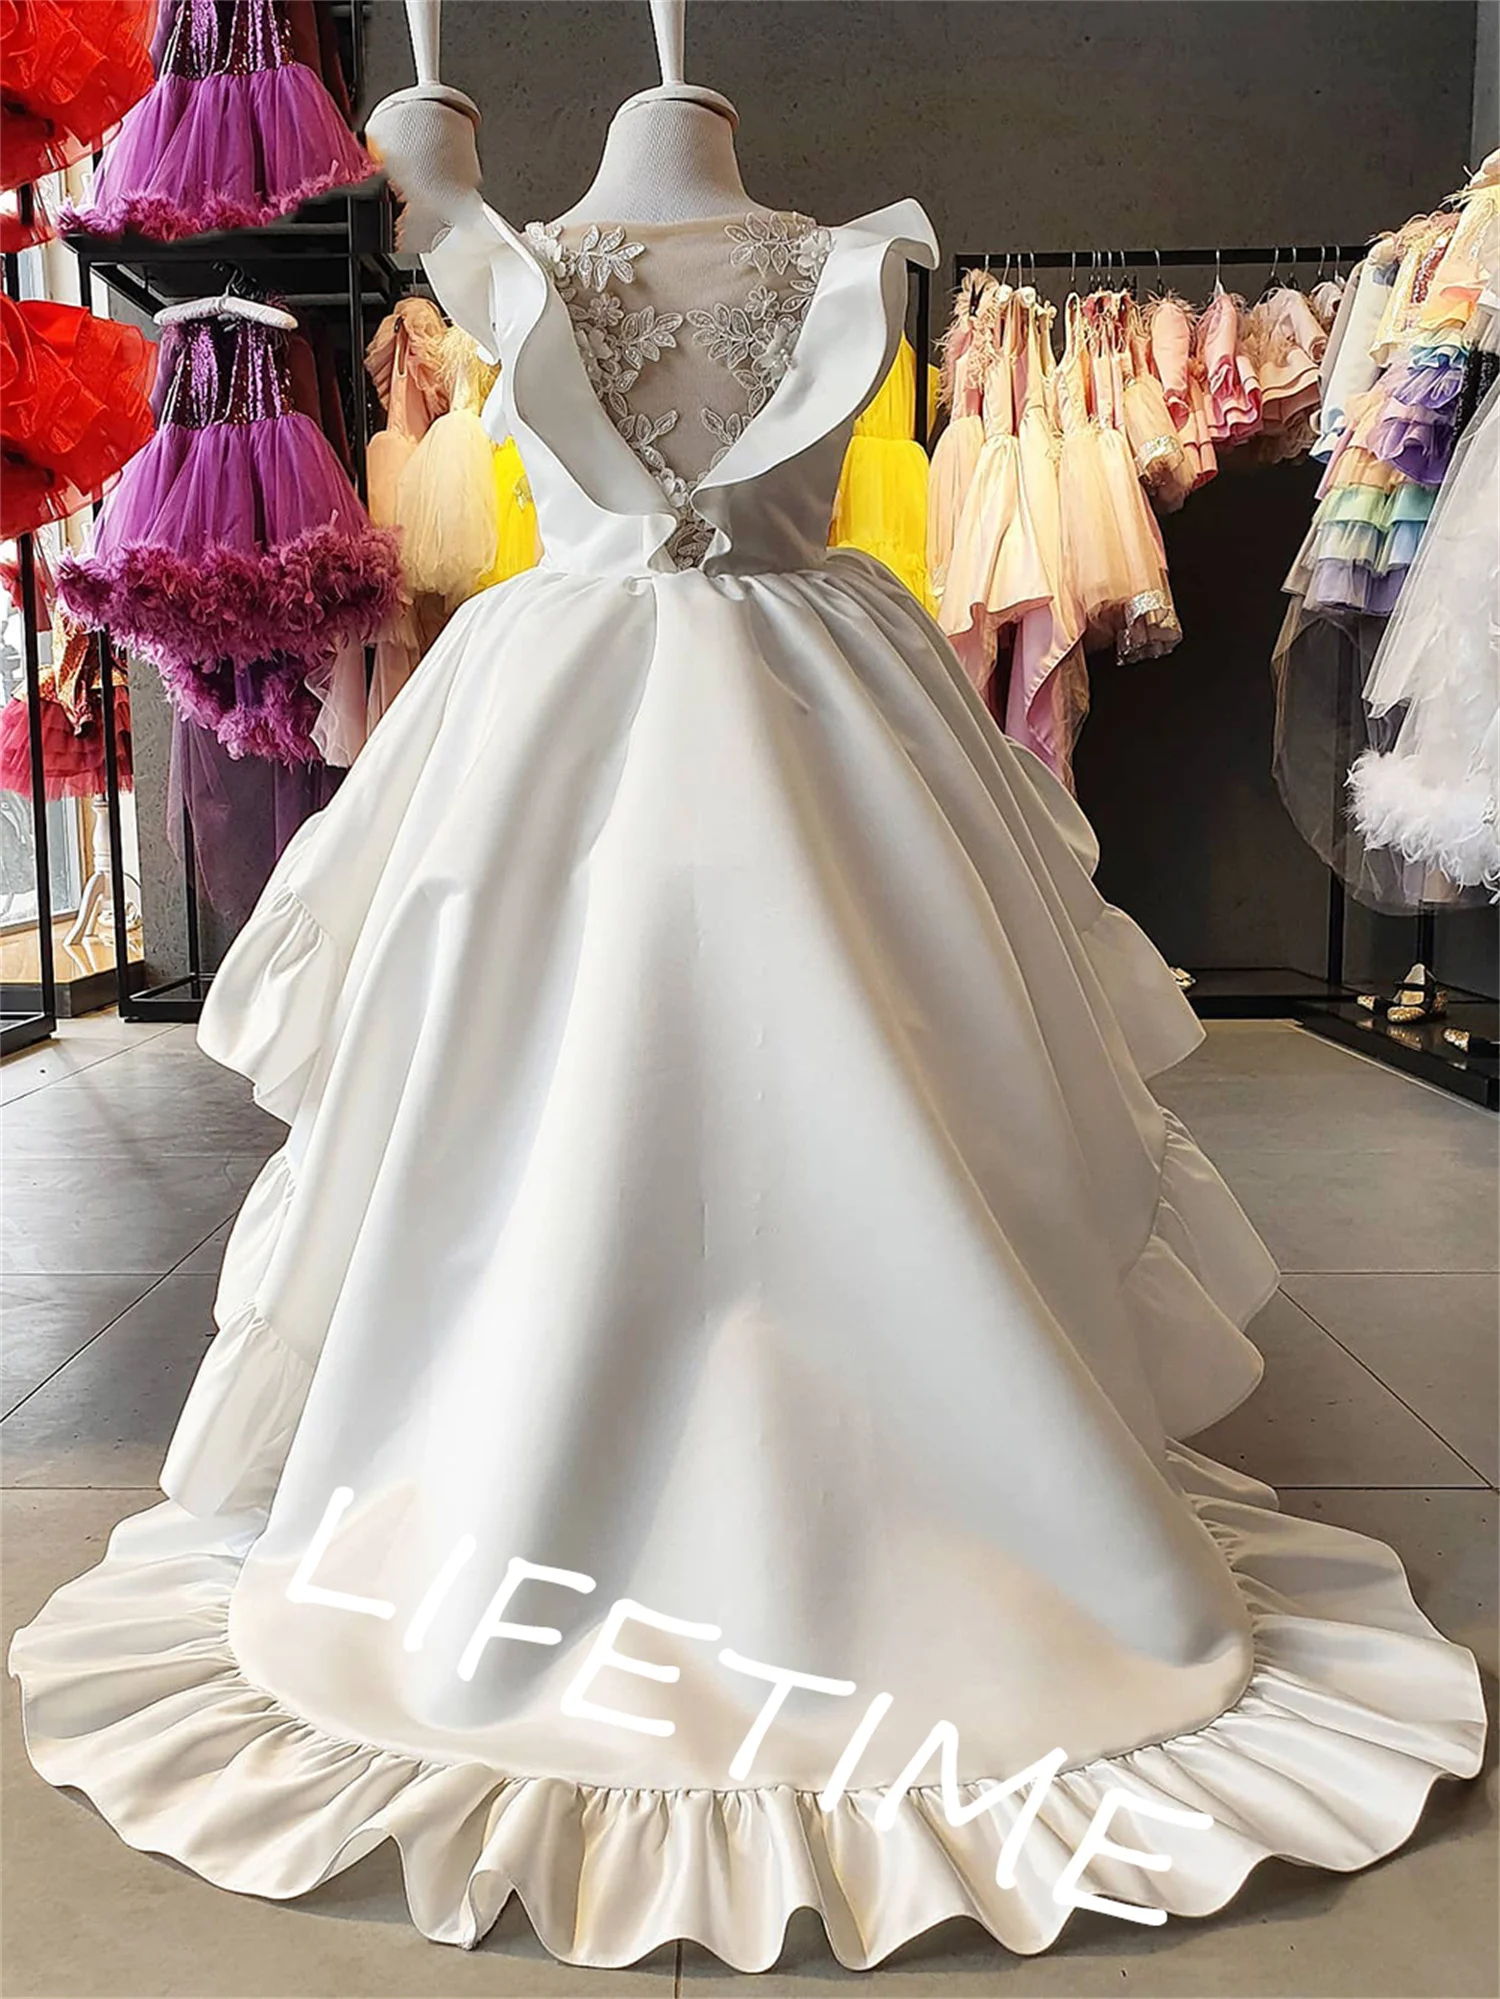 

Ivory Flower Girl Dress Puff Sleeves Girls Princess Wedding Party Dress First Communion Gown dresses for girls-flowers